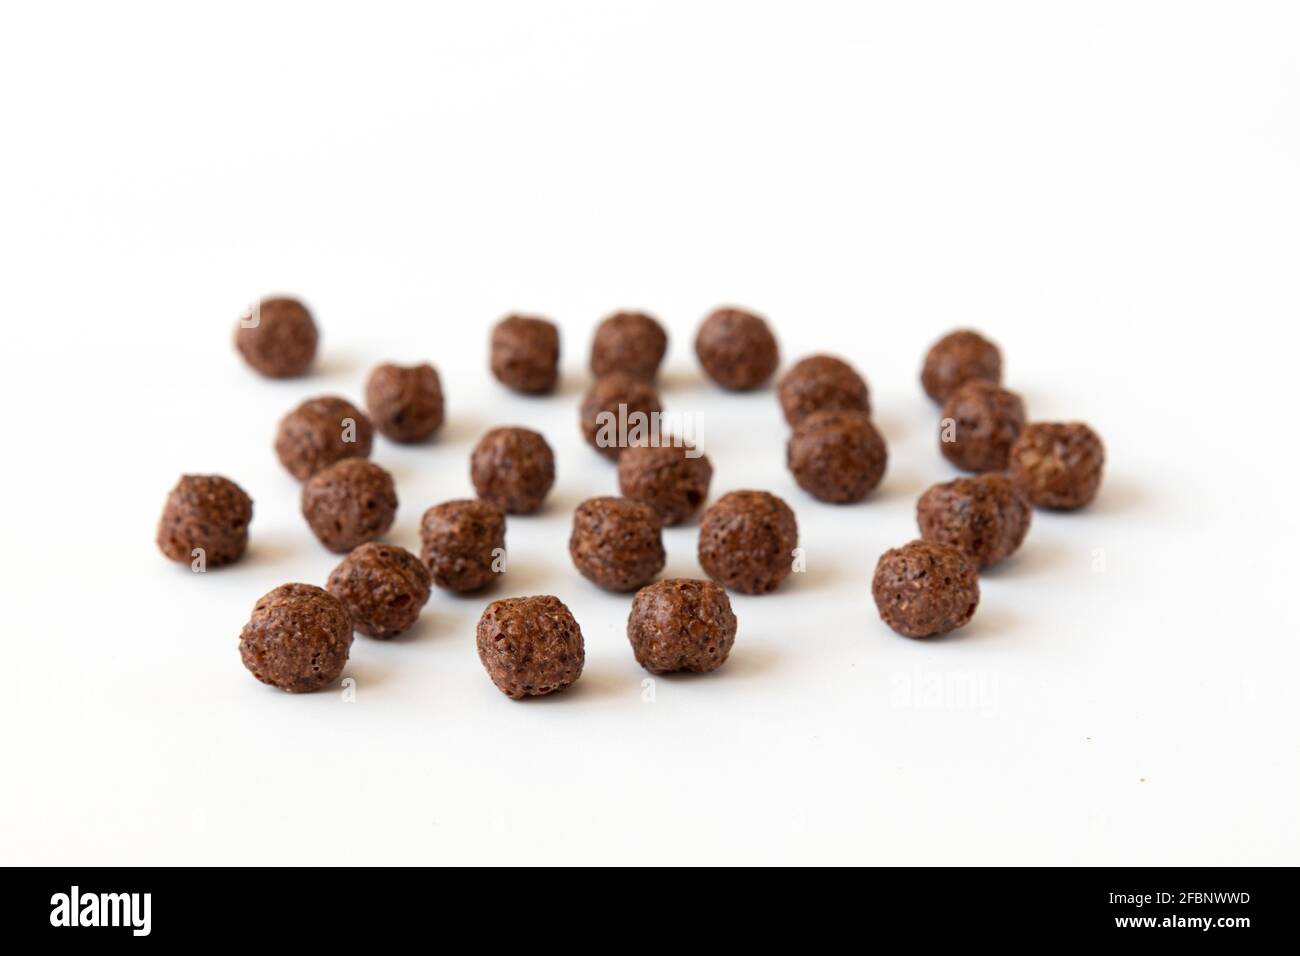 crunchy chocolate cereal balls isolated on white background, dry breakfast chocolate flavored balls Stock Photo